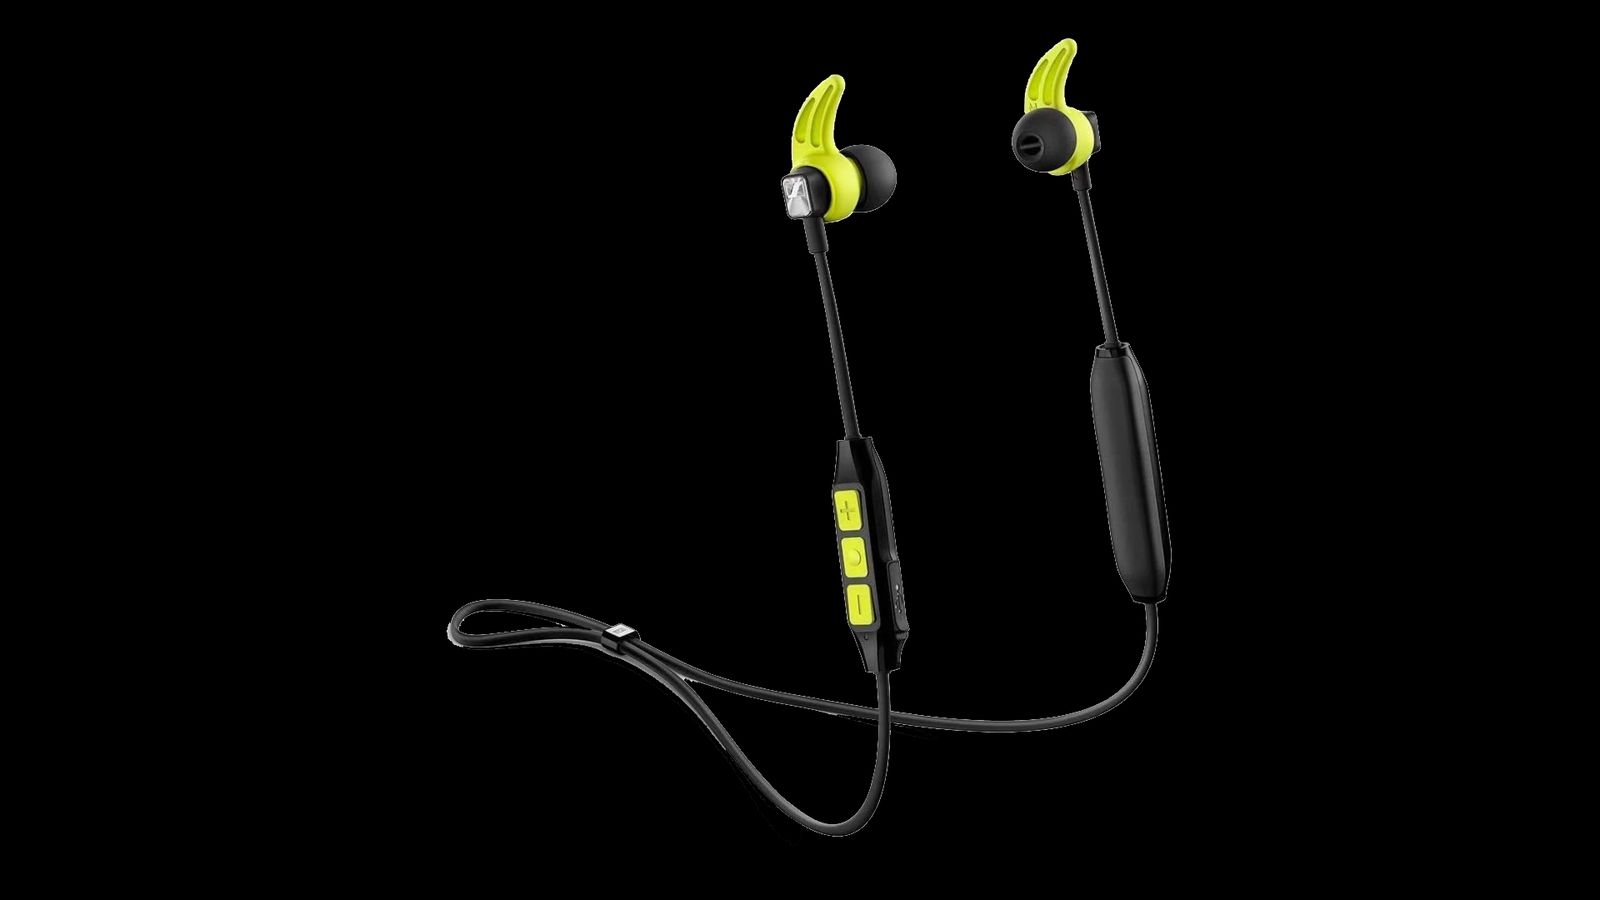 Sennheiser CX Sport product image of a pair of black and yellow earbuds with a cable to wrap around your neck